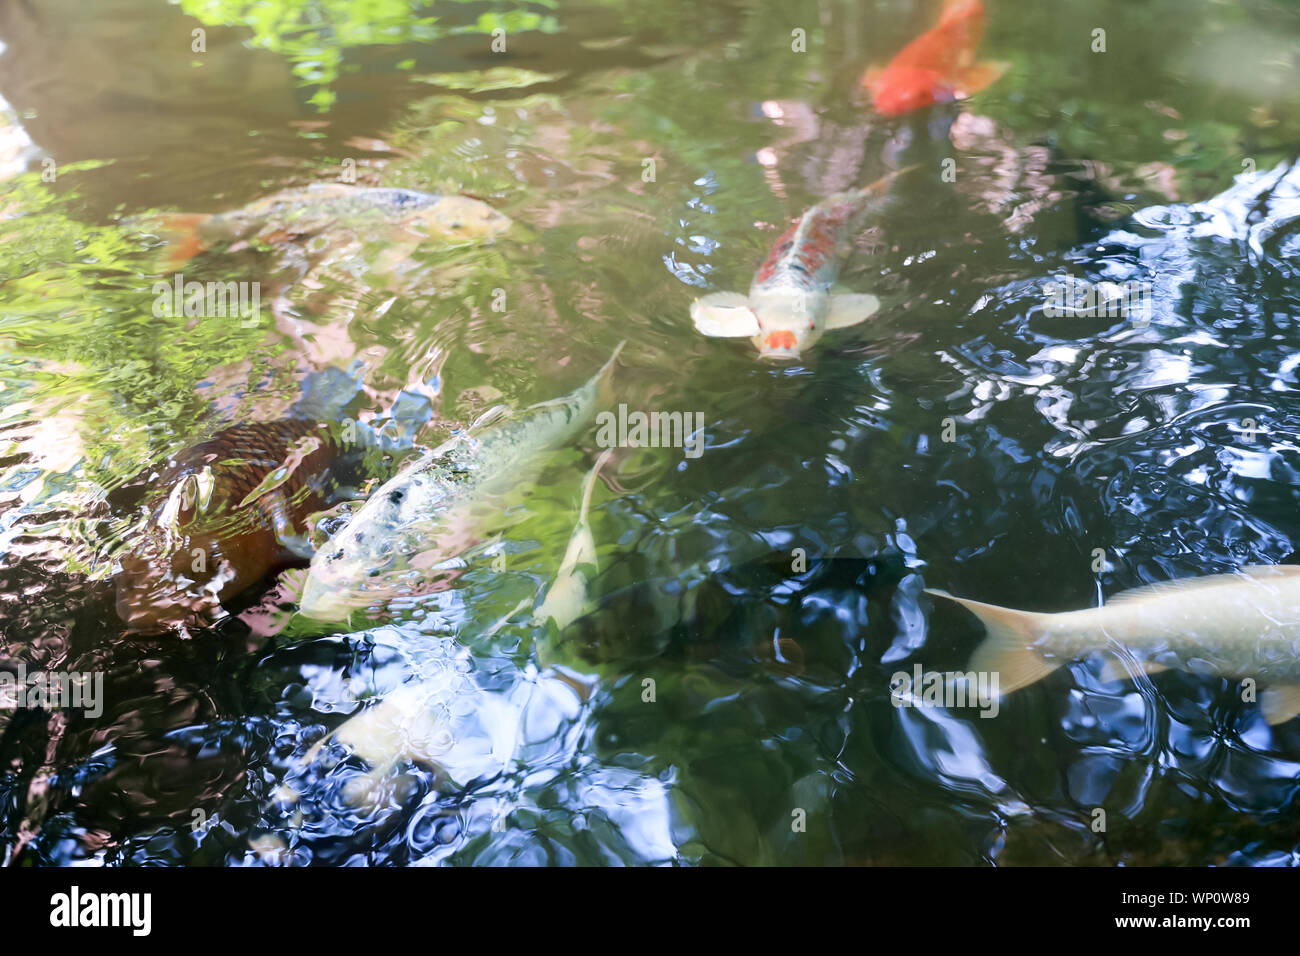 White fish, Golden fish, yellow fish, red fish or fenced carp swimming in water pond in USA - Image Stock Photo